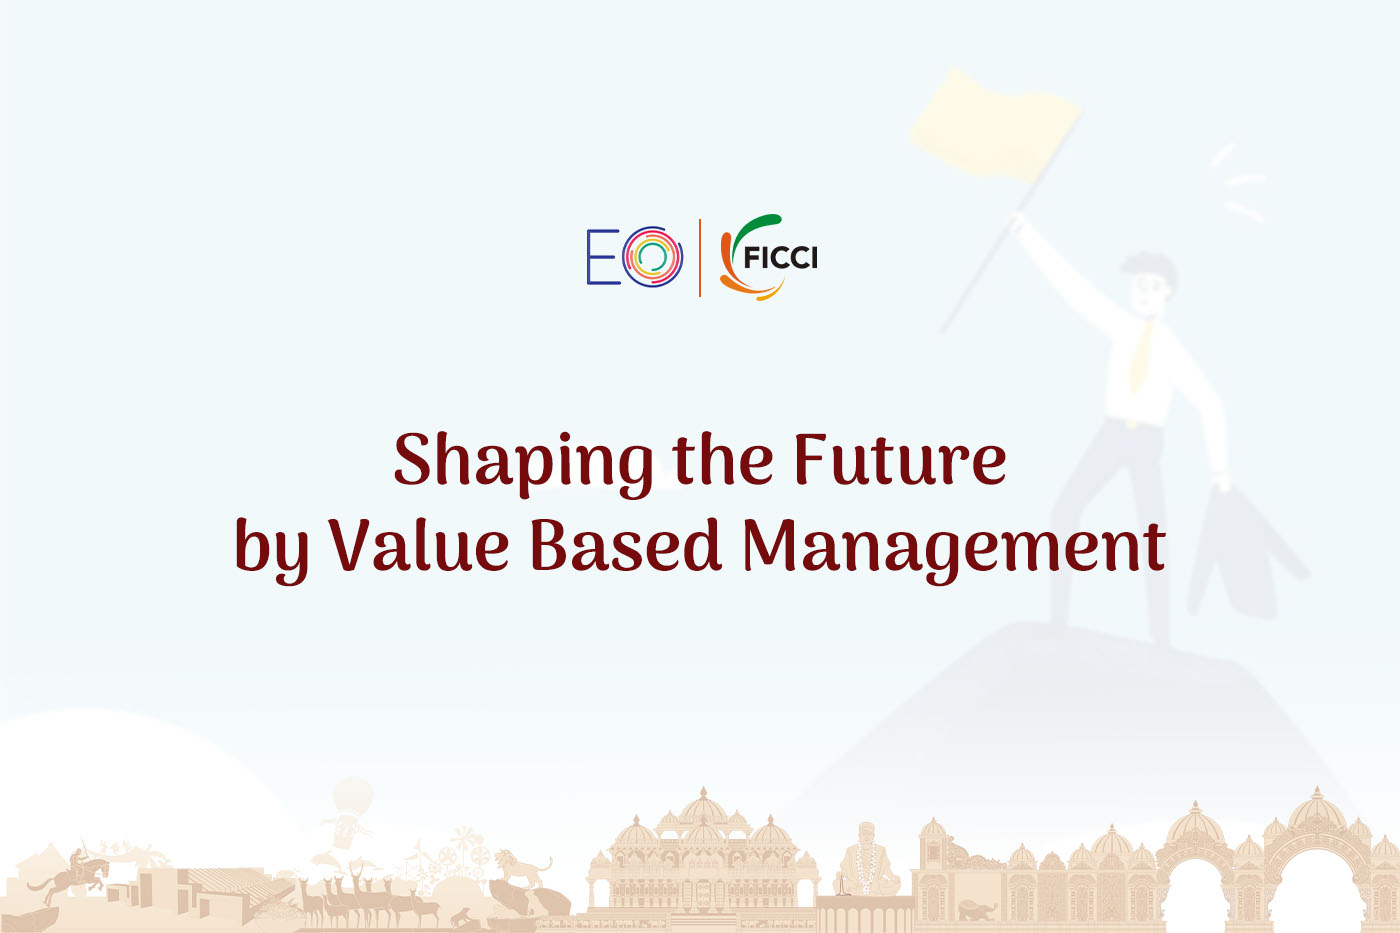 Shaping the Future by Value Based Management